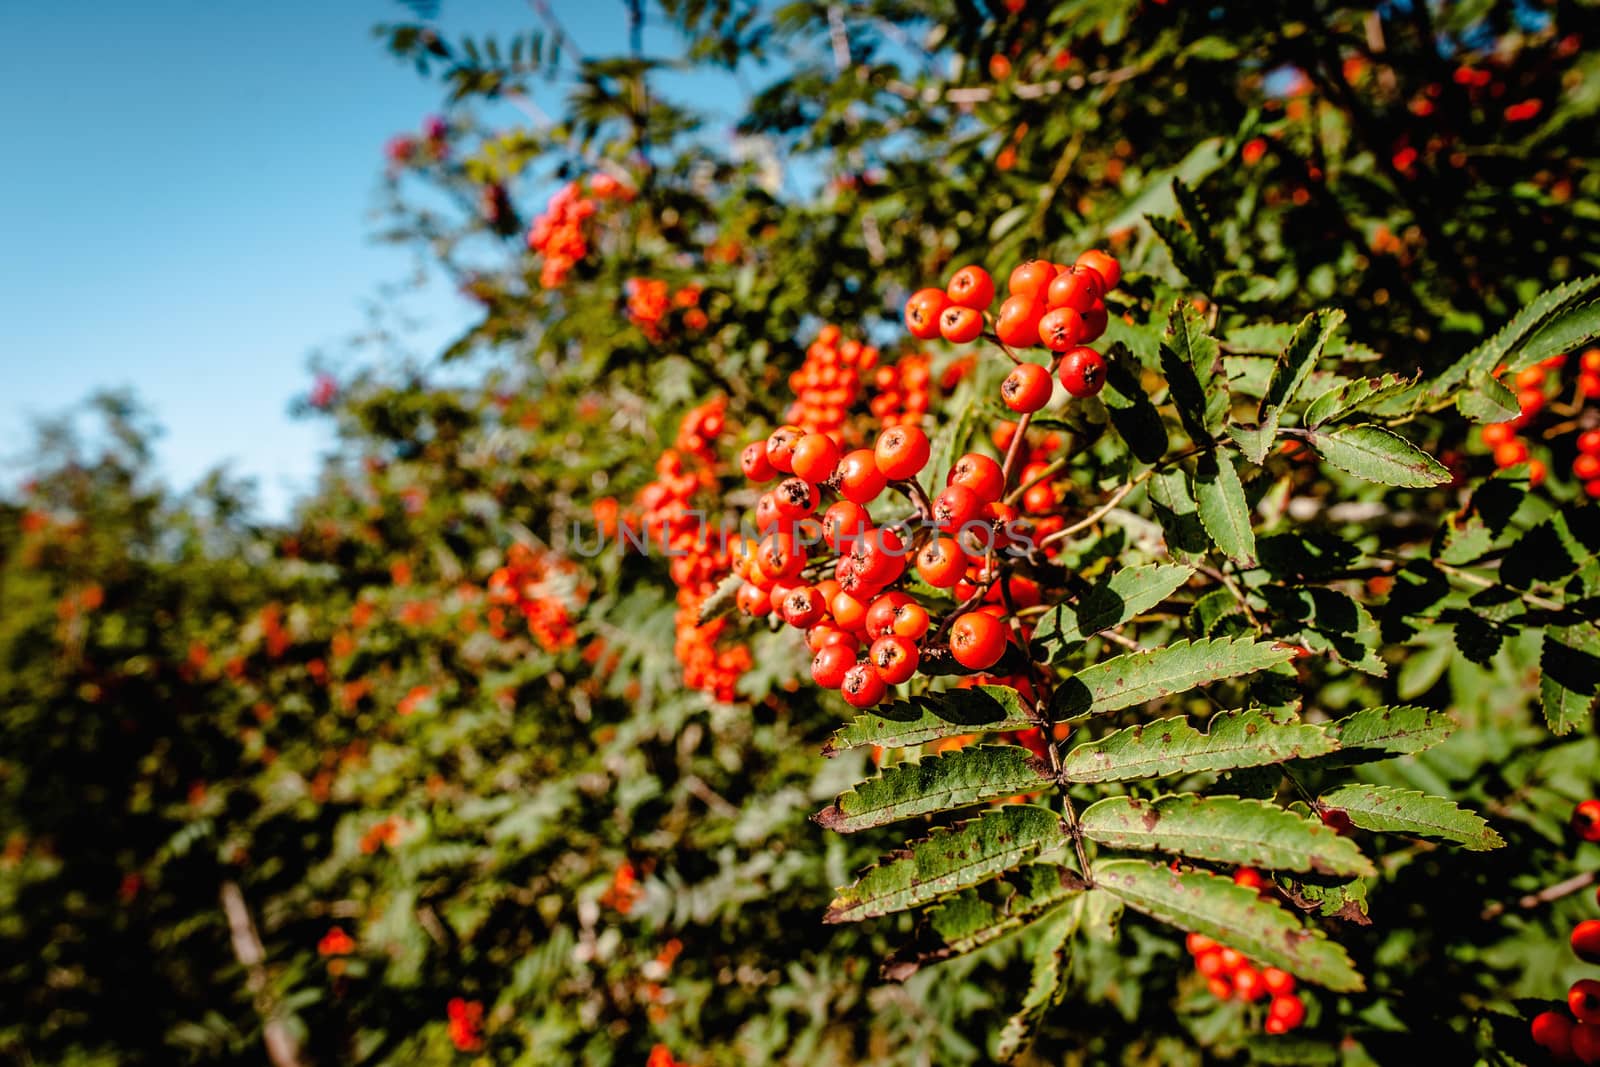 Pyracantha coccinea berries hanging on a branch in natural surroundings